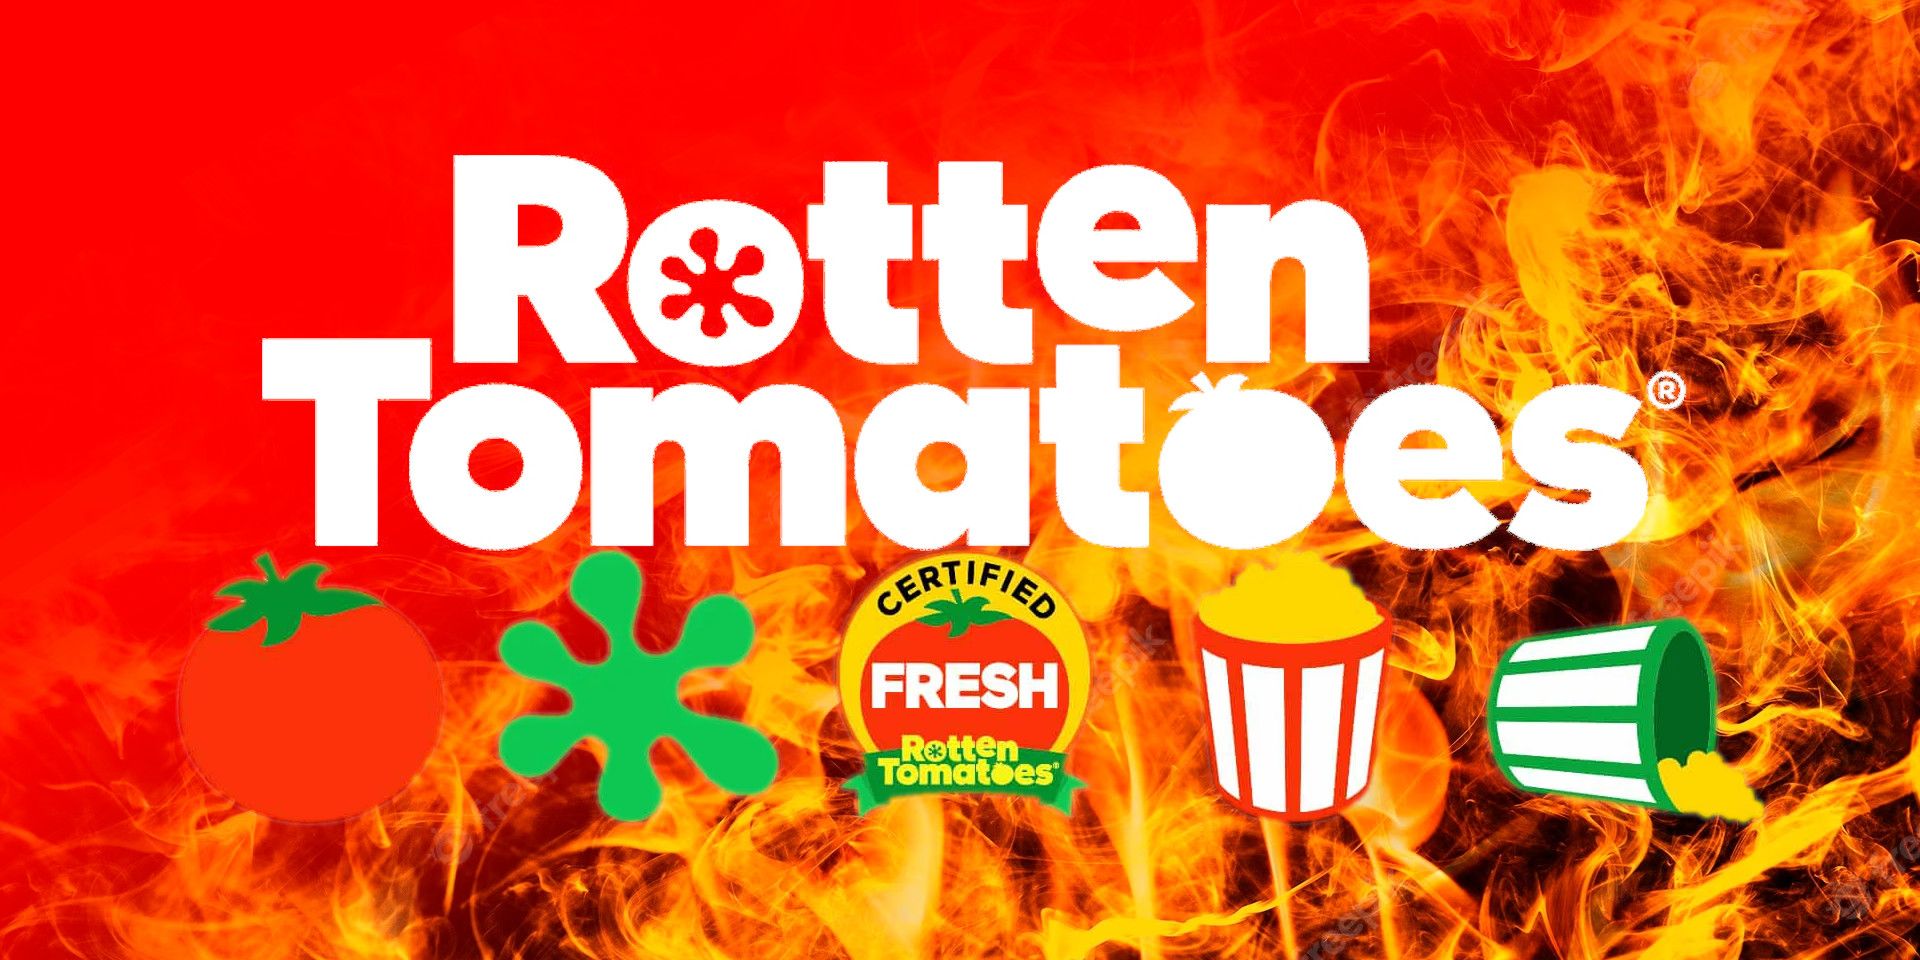 5 Clear Signs That Rotten Tomatoes Was Always Broken